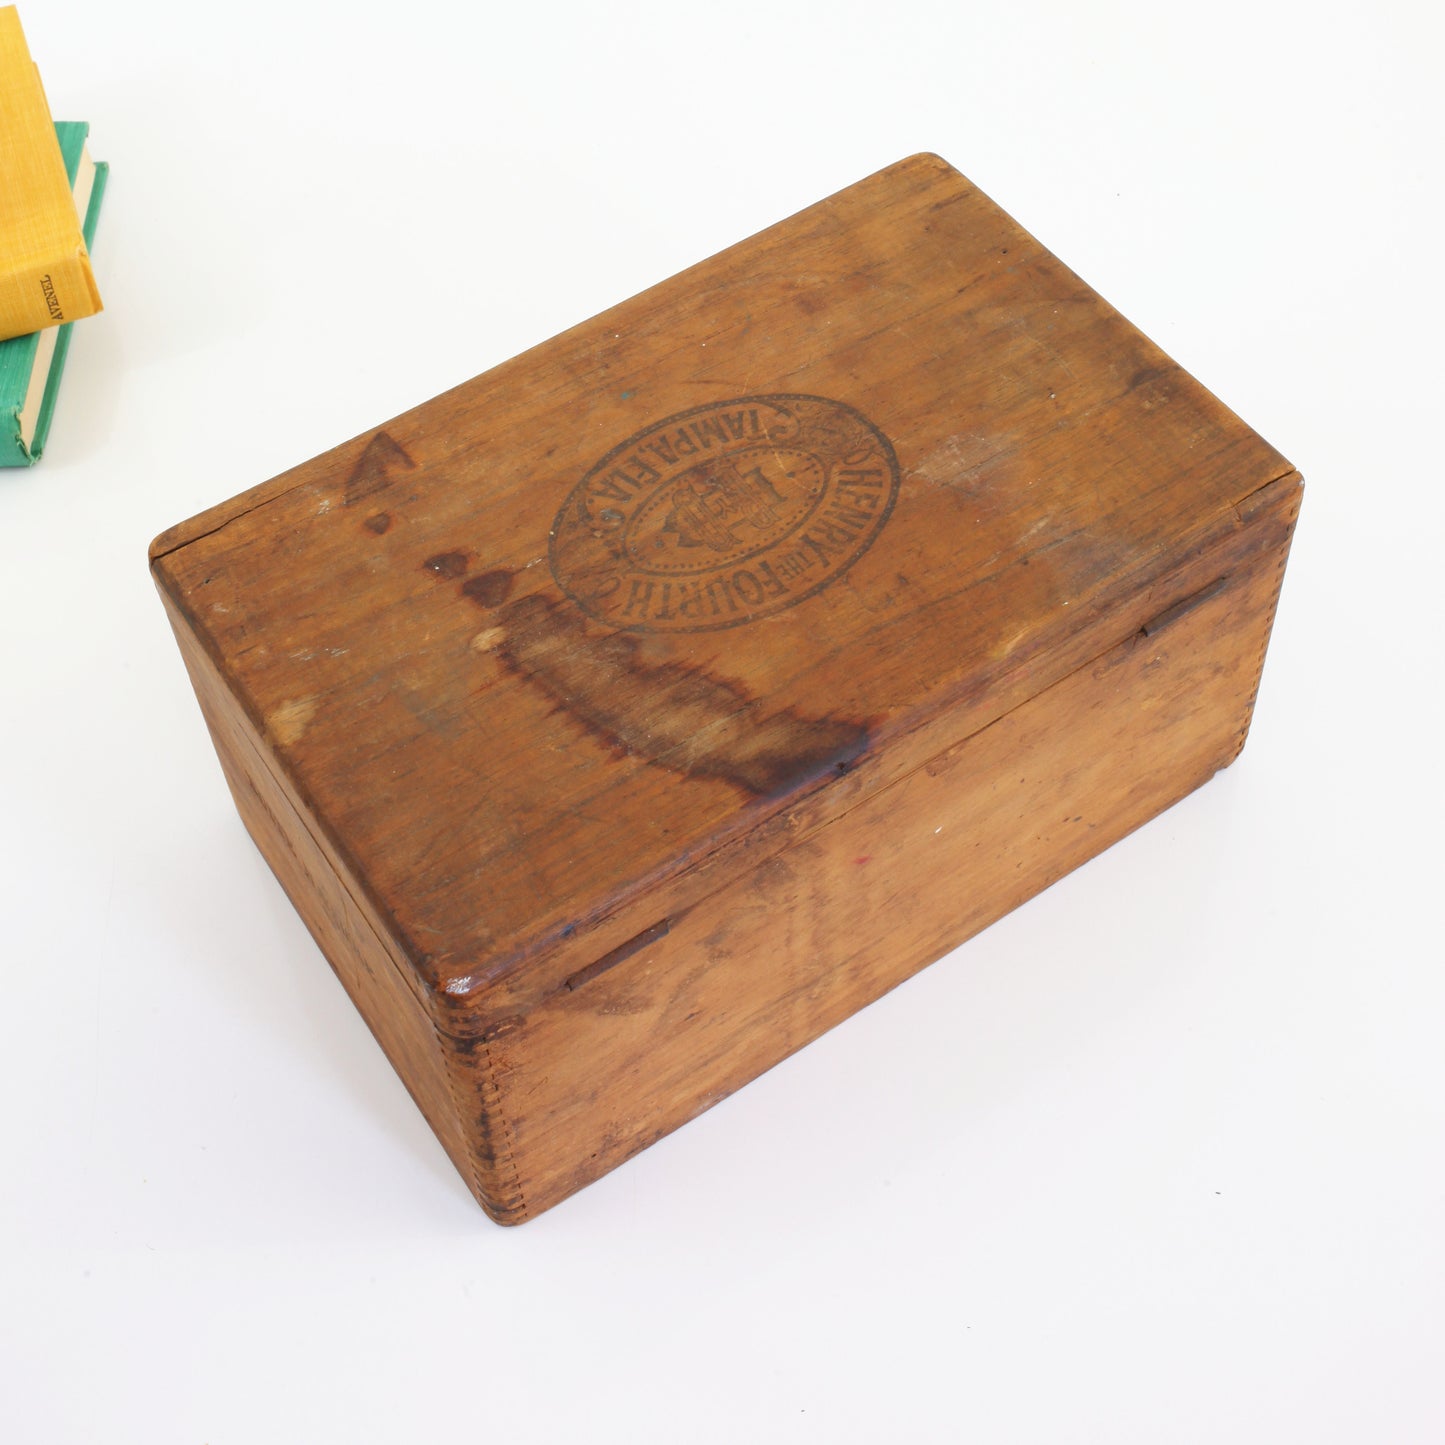 SOLD - Vintage Henry The Fourth No. 19 Wooden Cigar Box